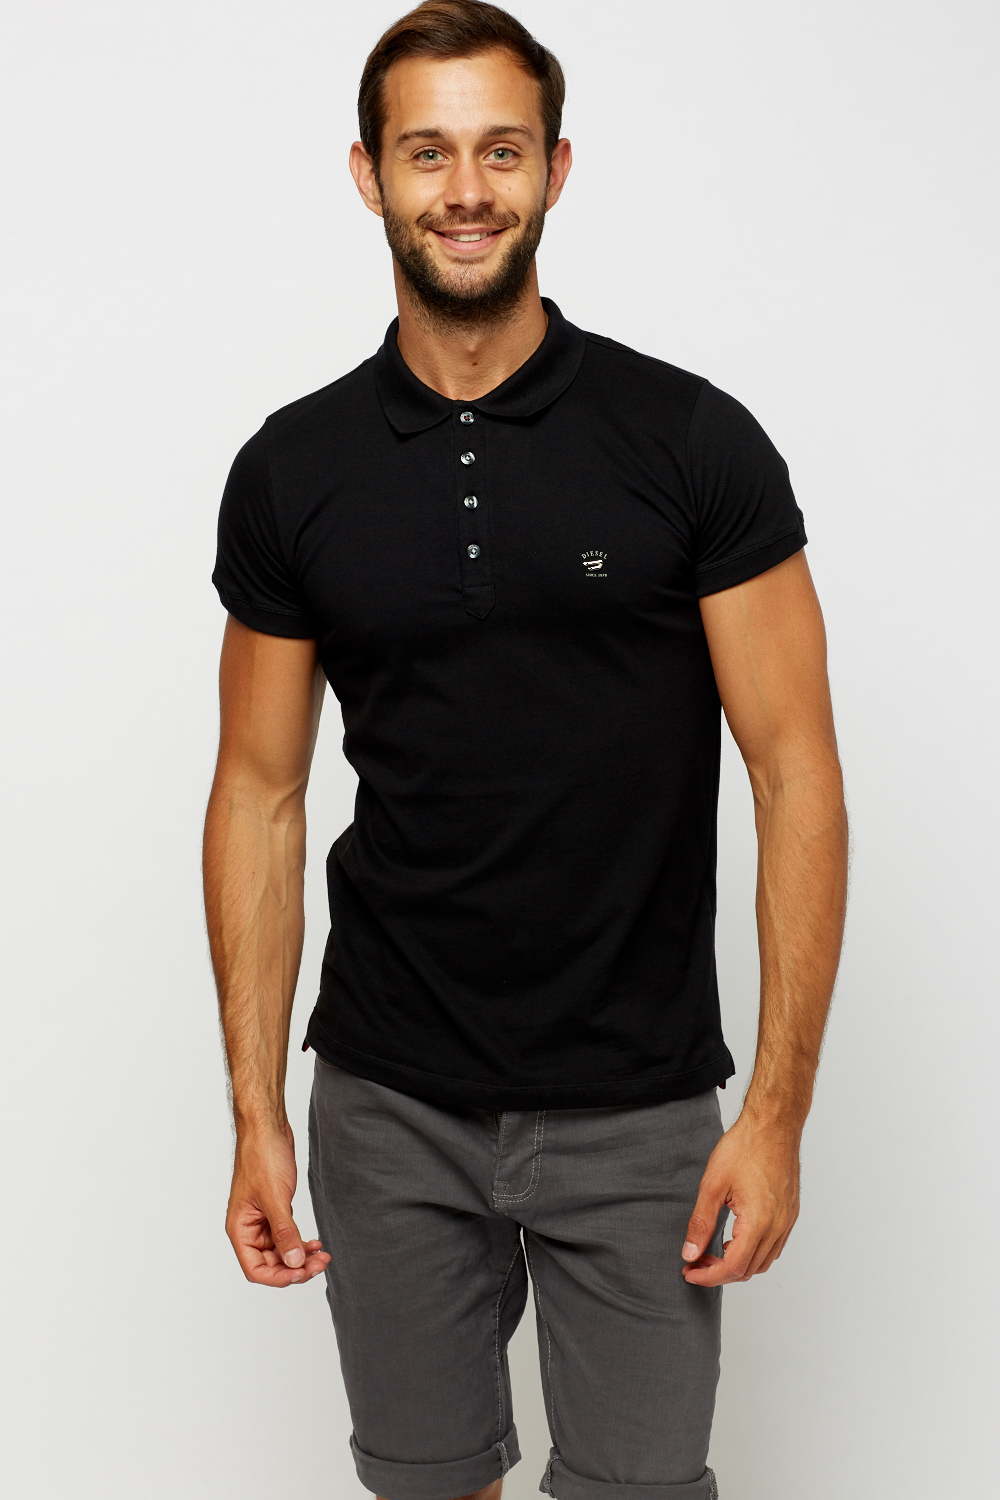 Diesel Mens Black Polo T-Shirt - Limited edition | Discount Designer Stock